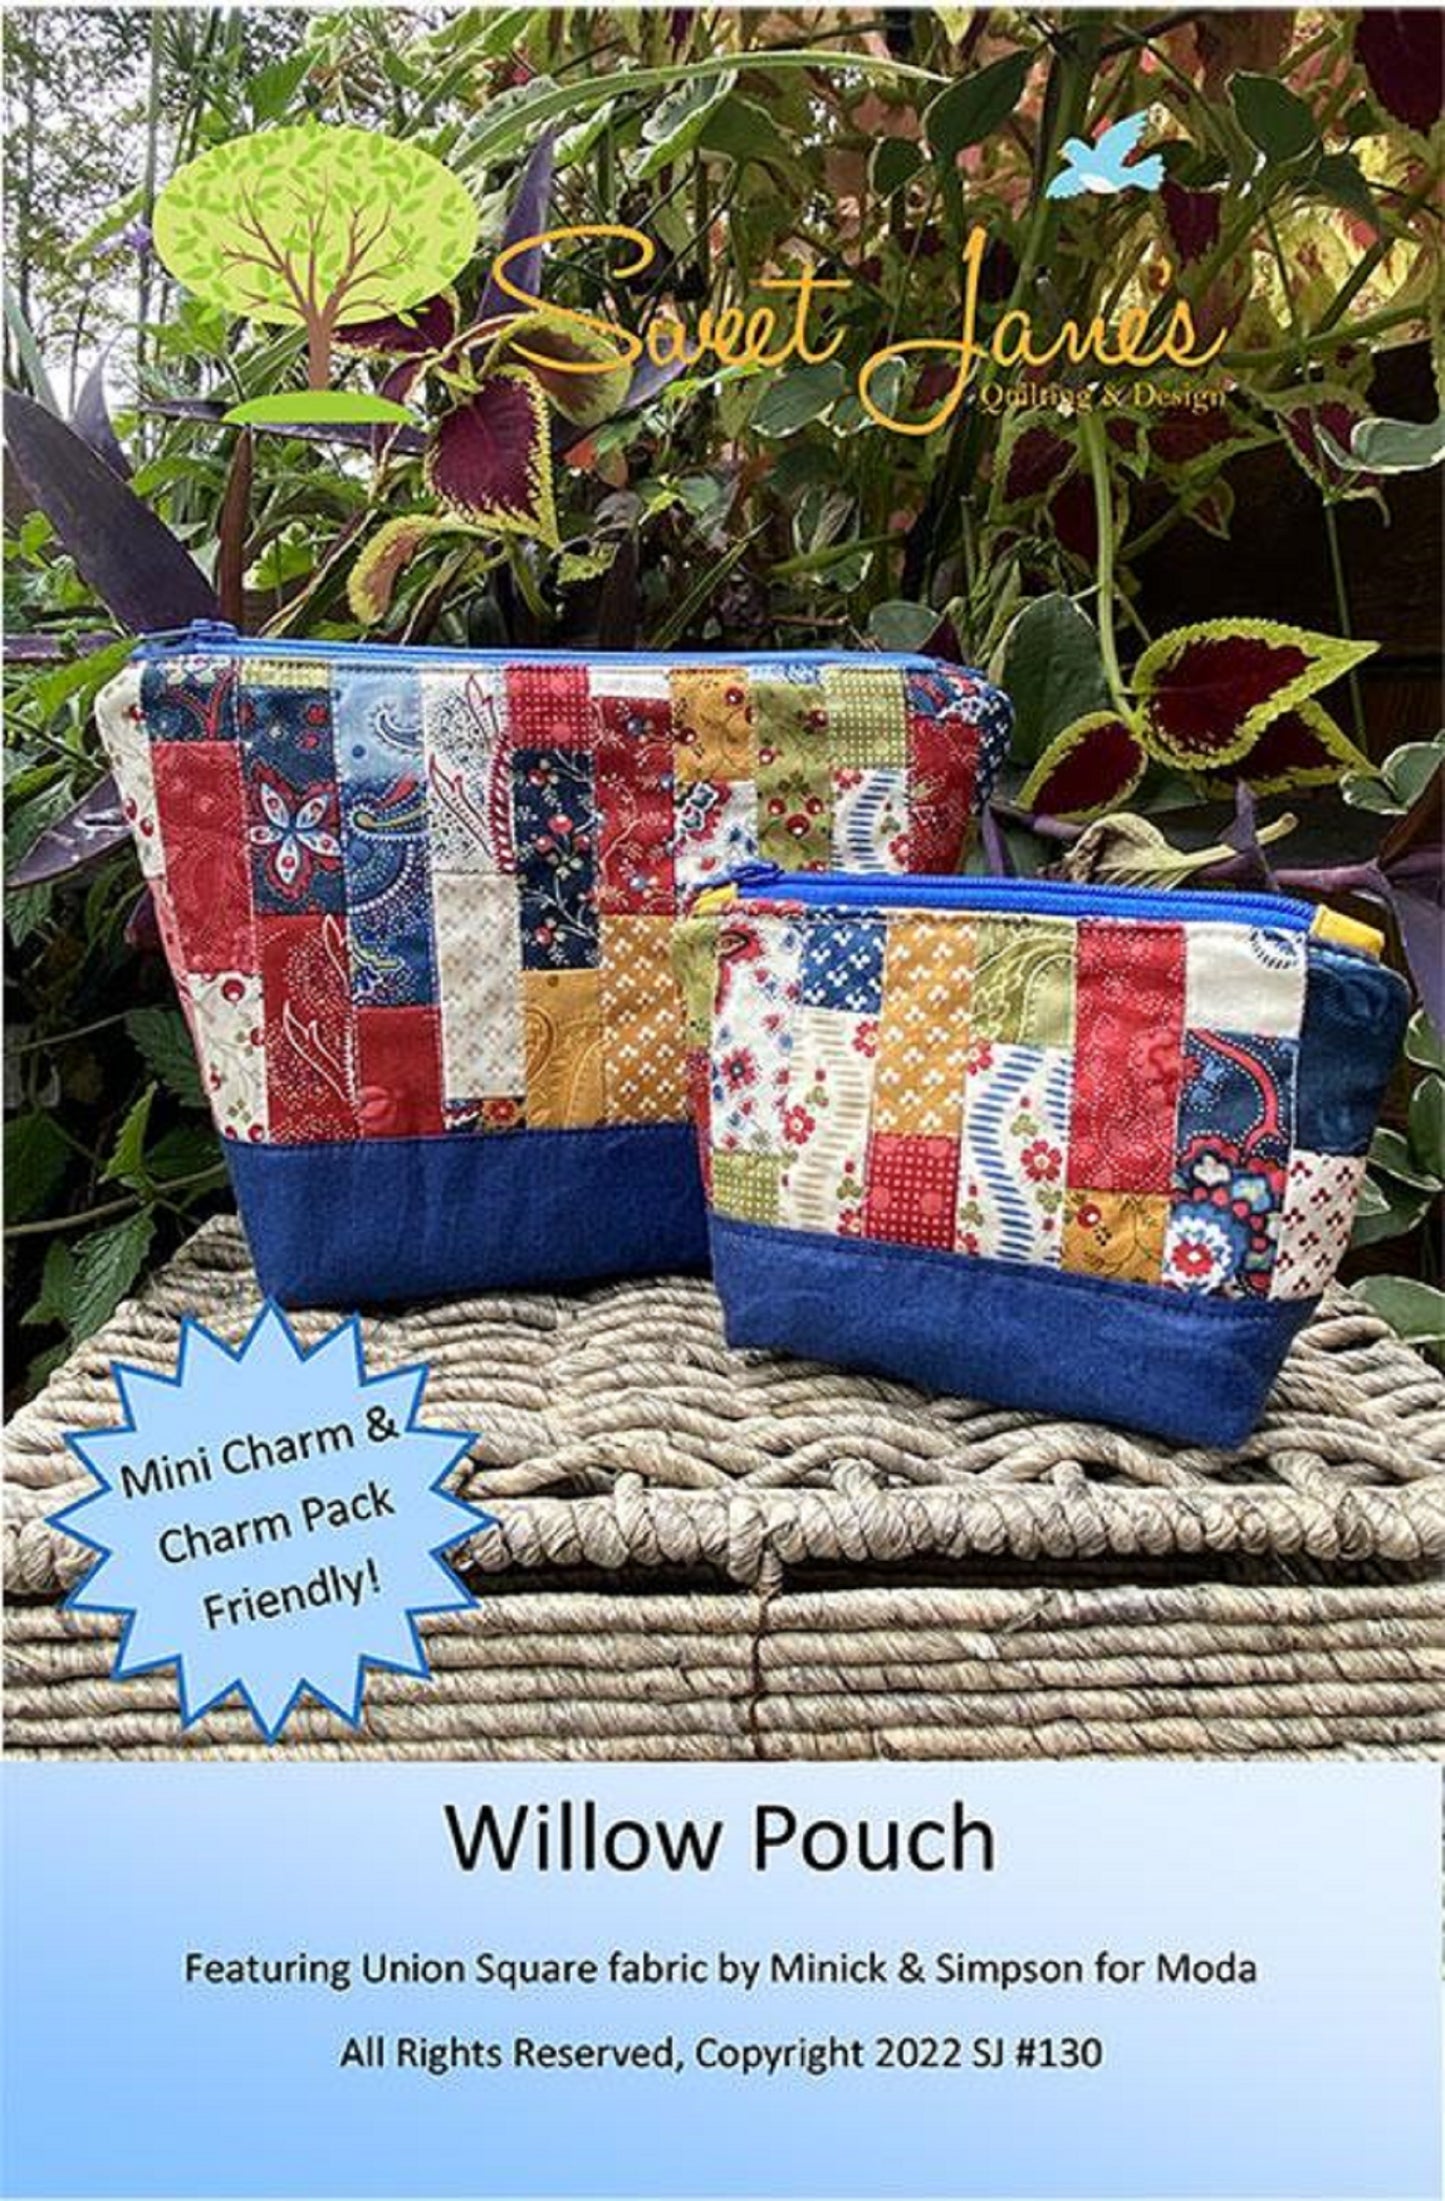 Willow Pouch-Sweet Jane's Quilting and Design-Mini Charm and Charm Pack Friendly